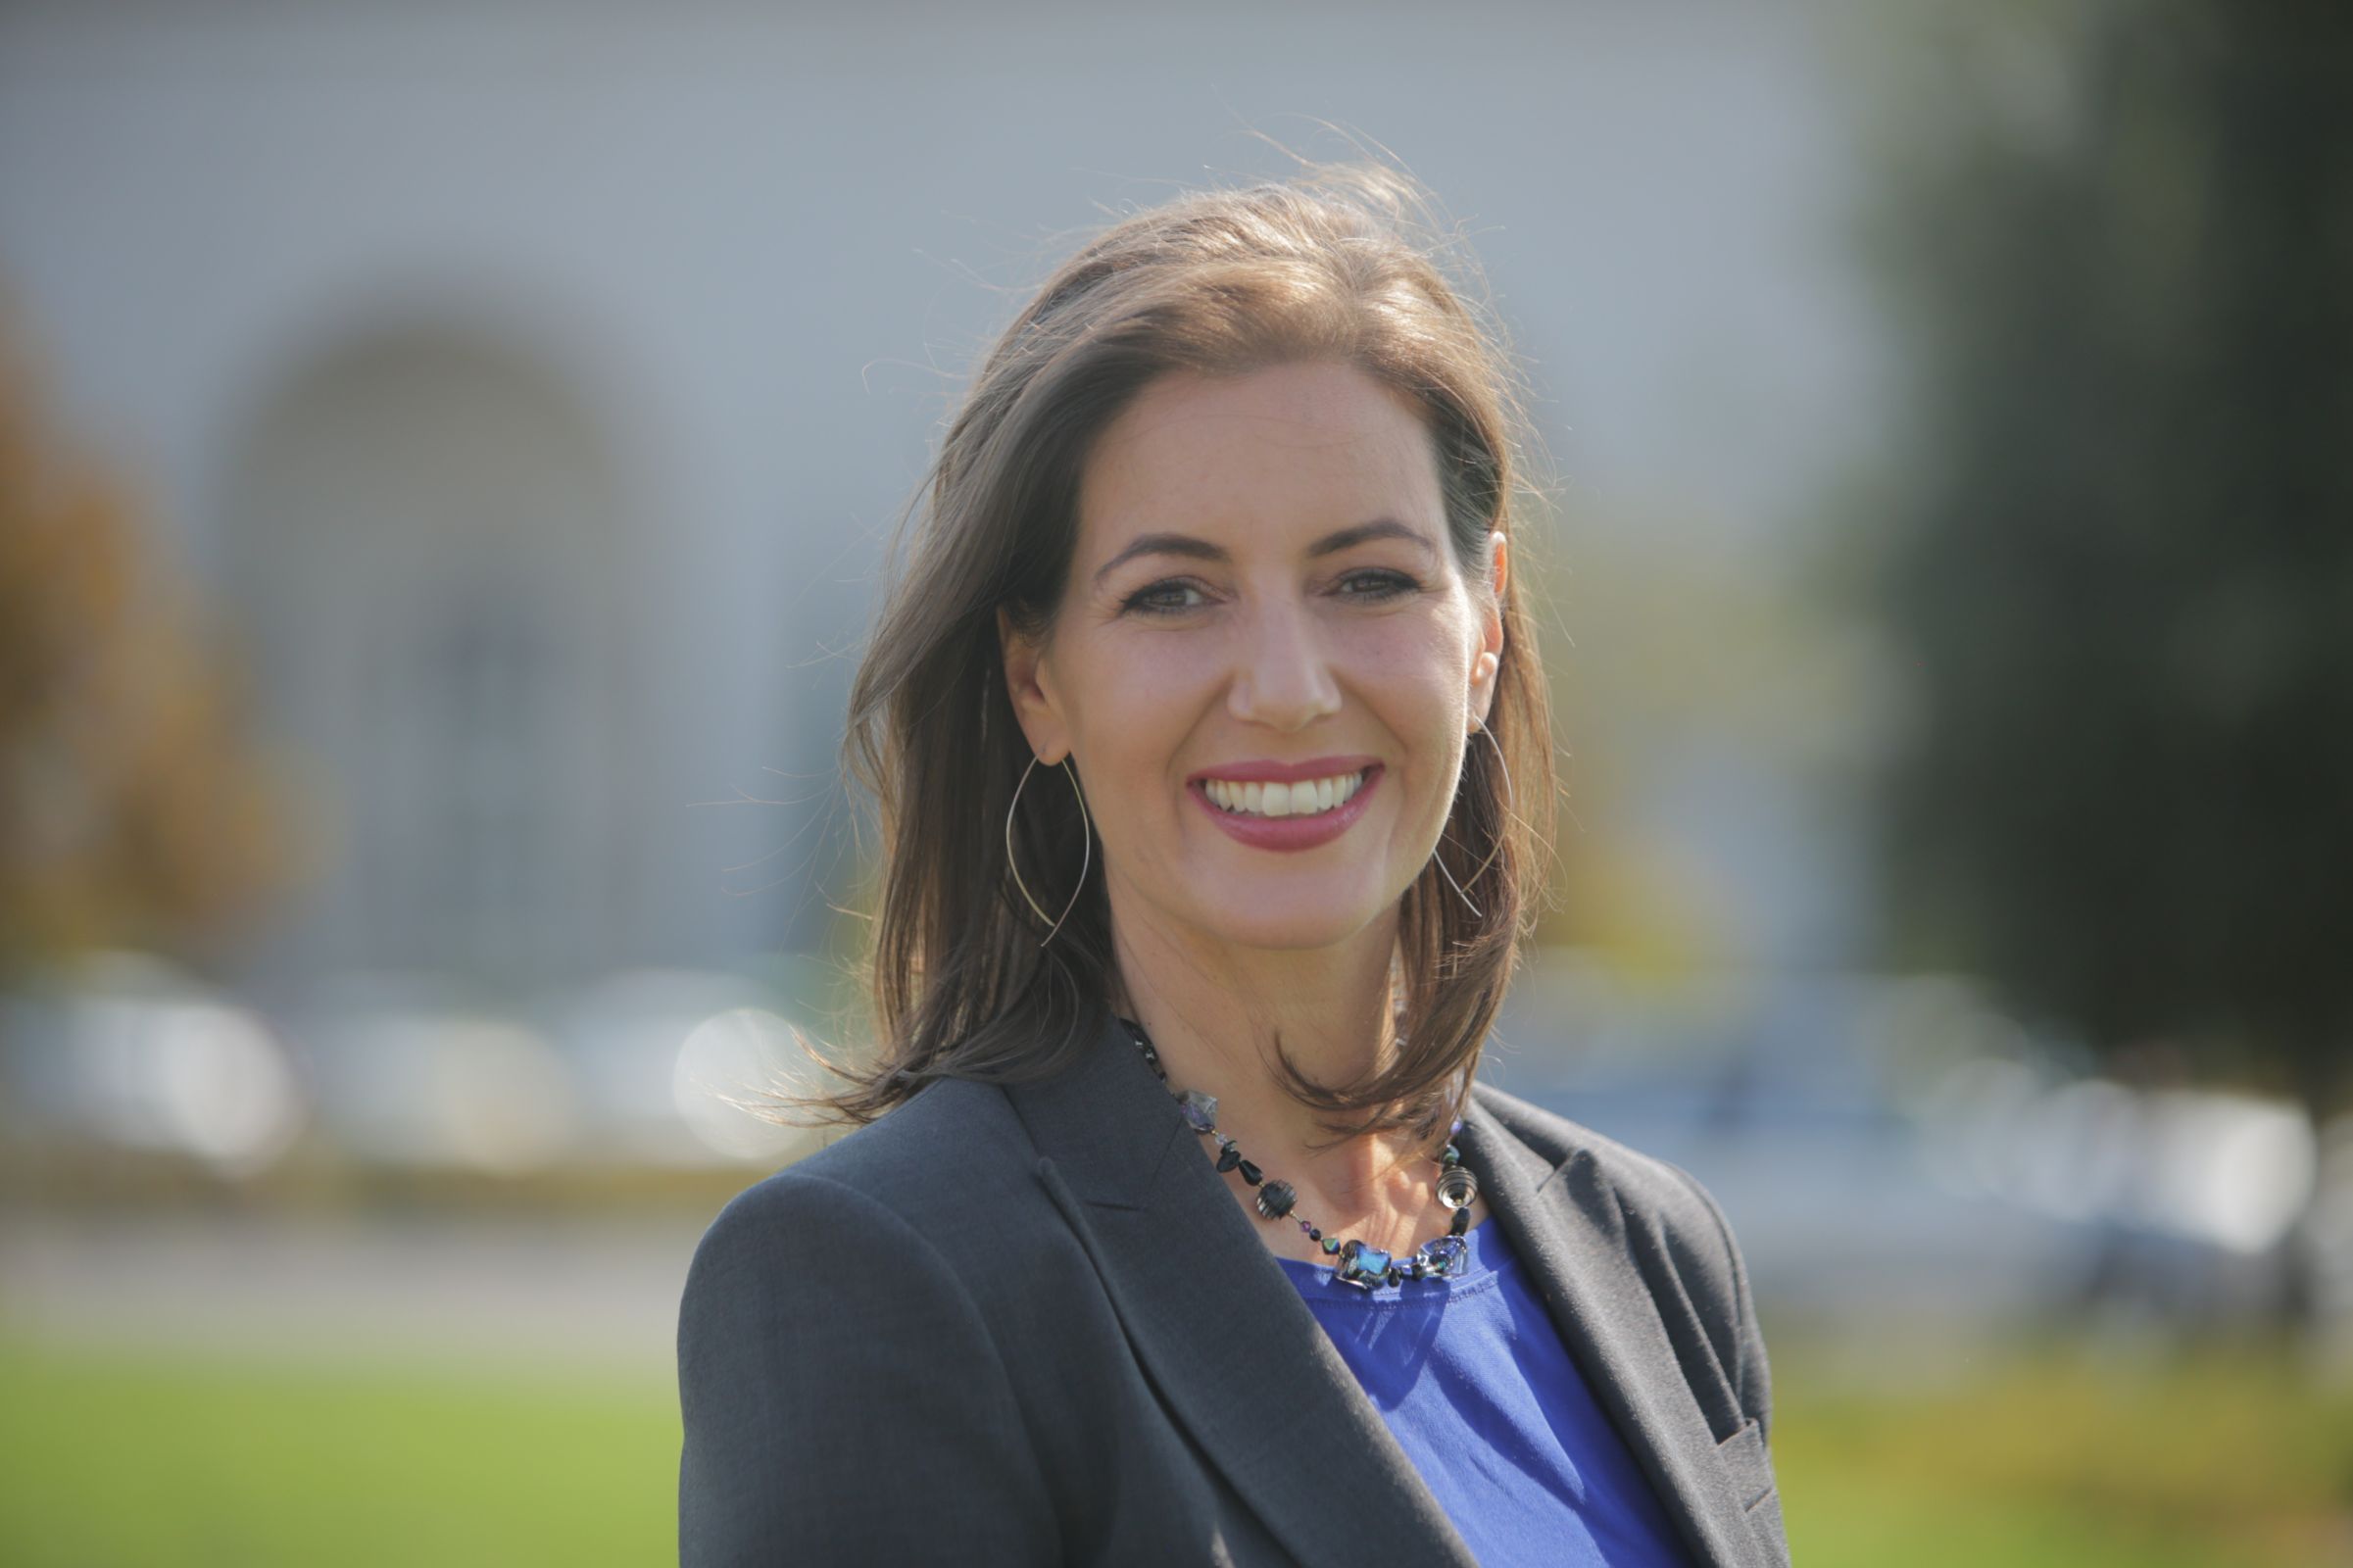 Oakland Mayor Libby Schaaf to highlight importance of public-sector leadership at 2022 Greater Portland Economic Summit Main Photo